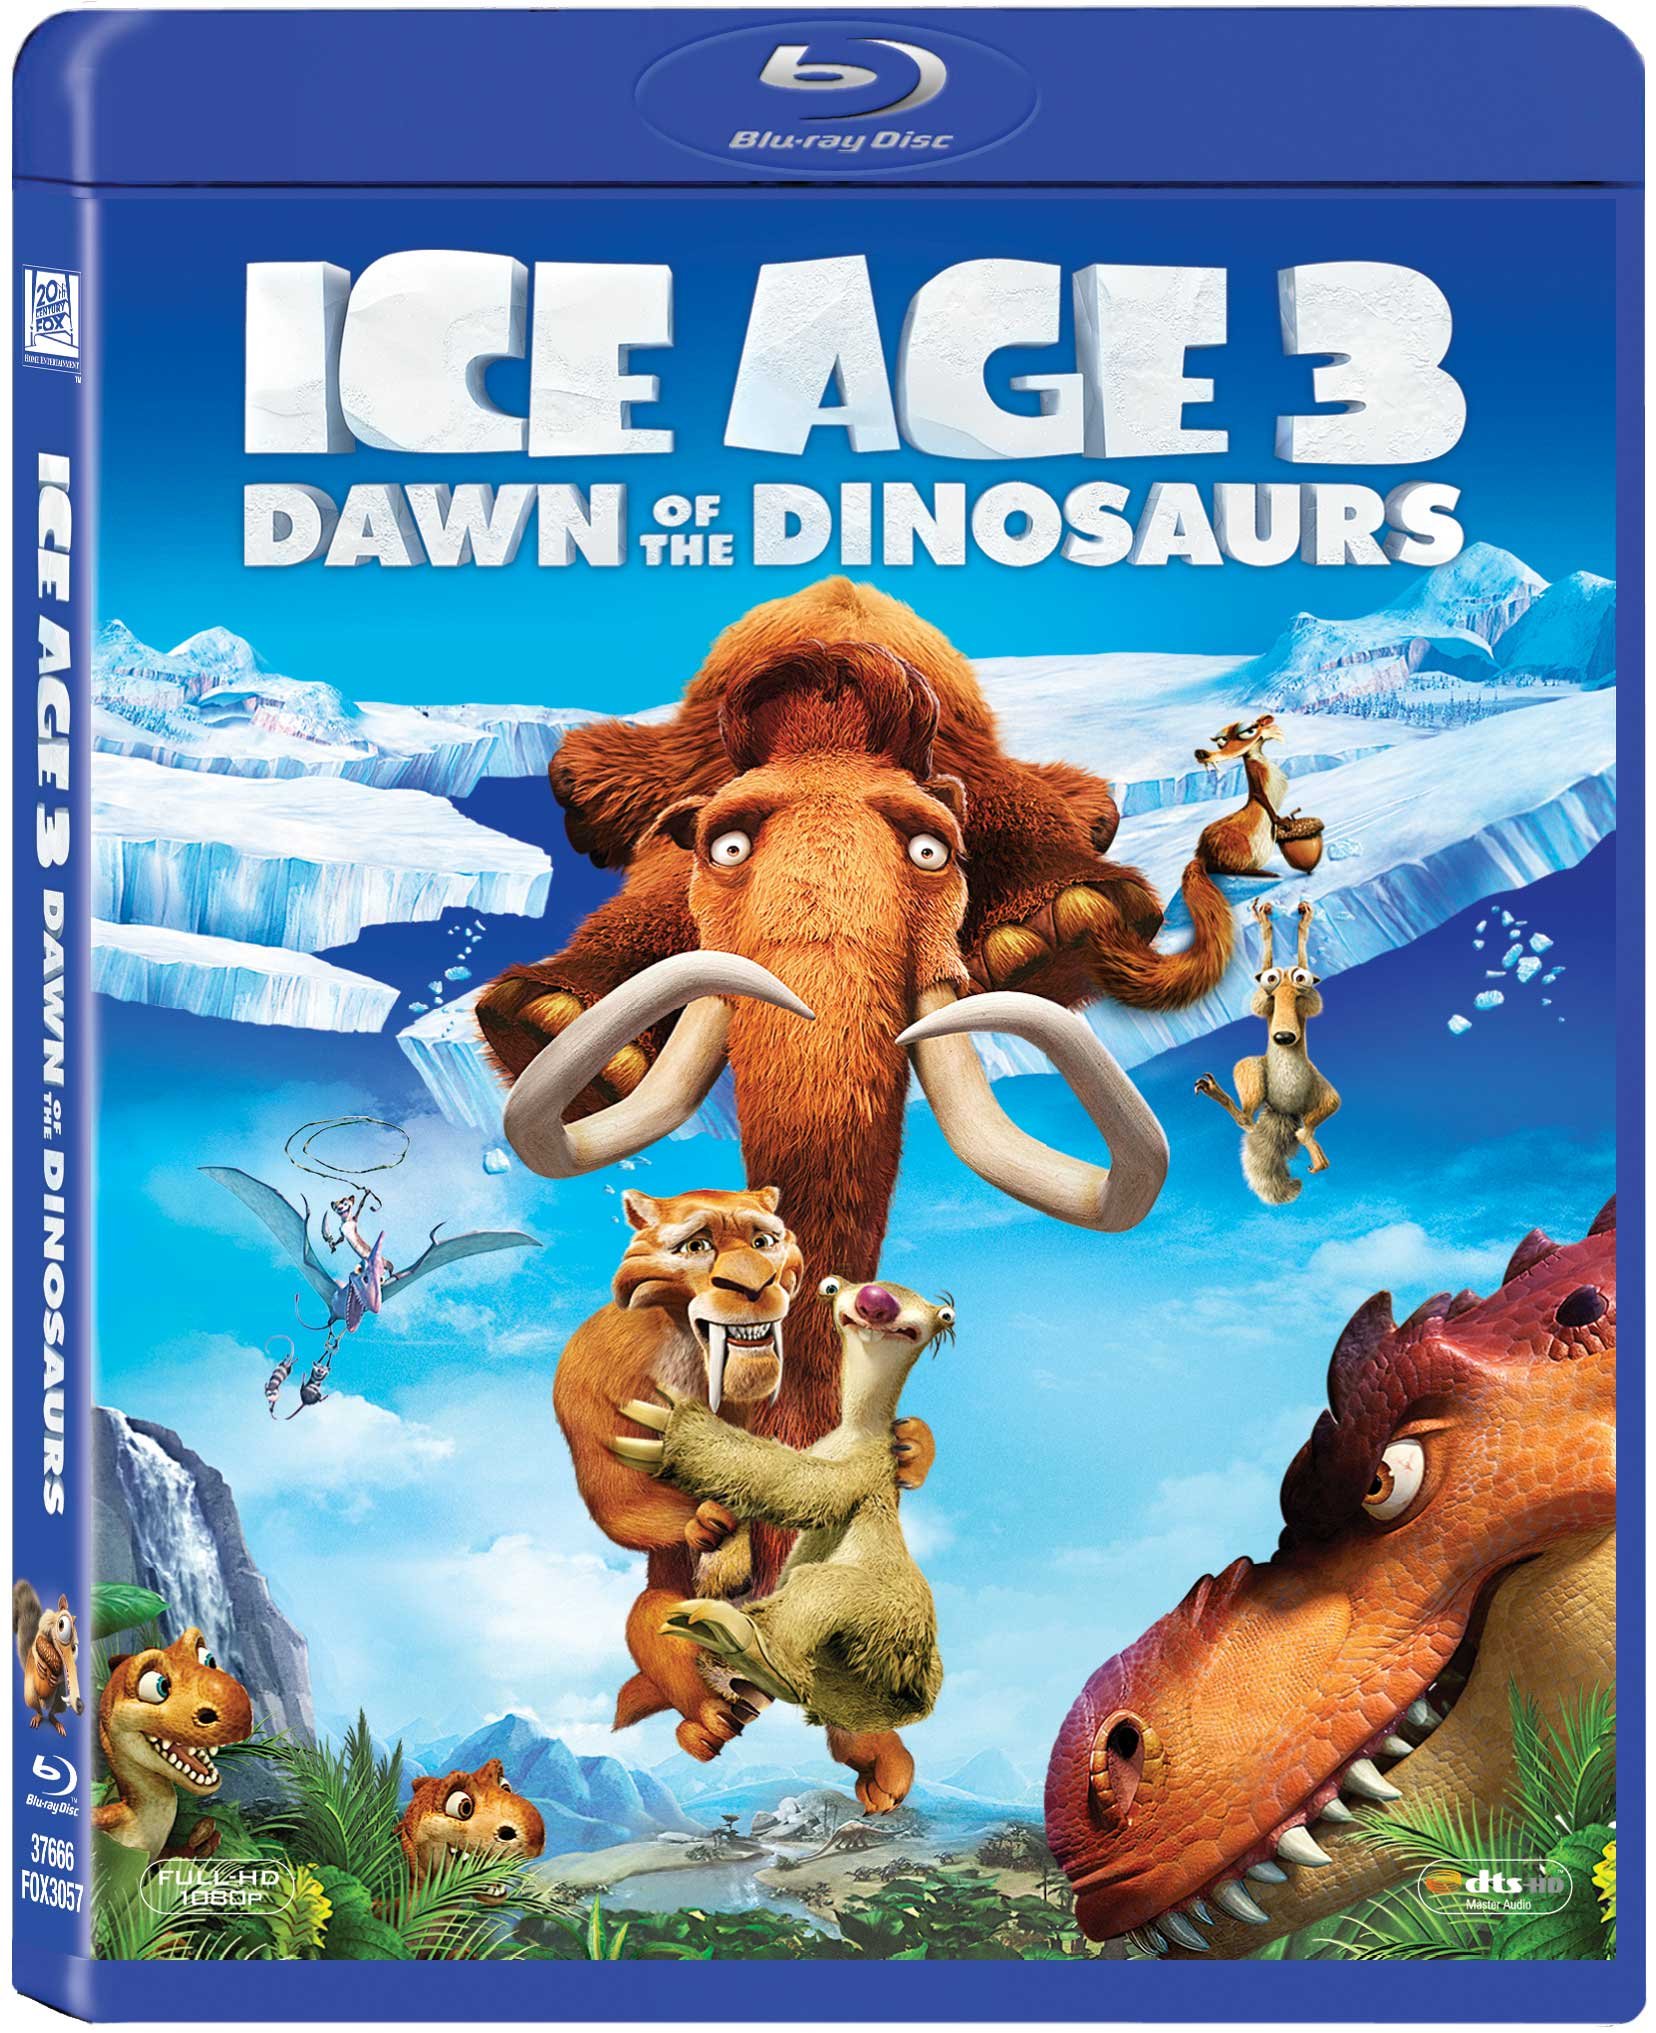 ice-age-3-dawn-of-the-dinosaurs-movie-purchase-or-watch-online-2